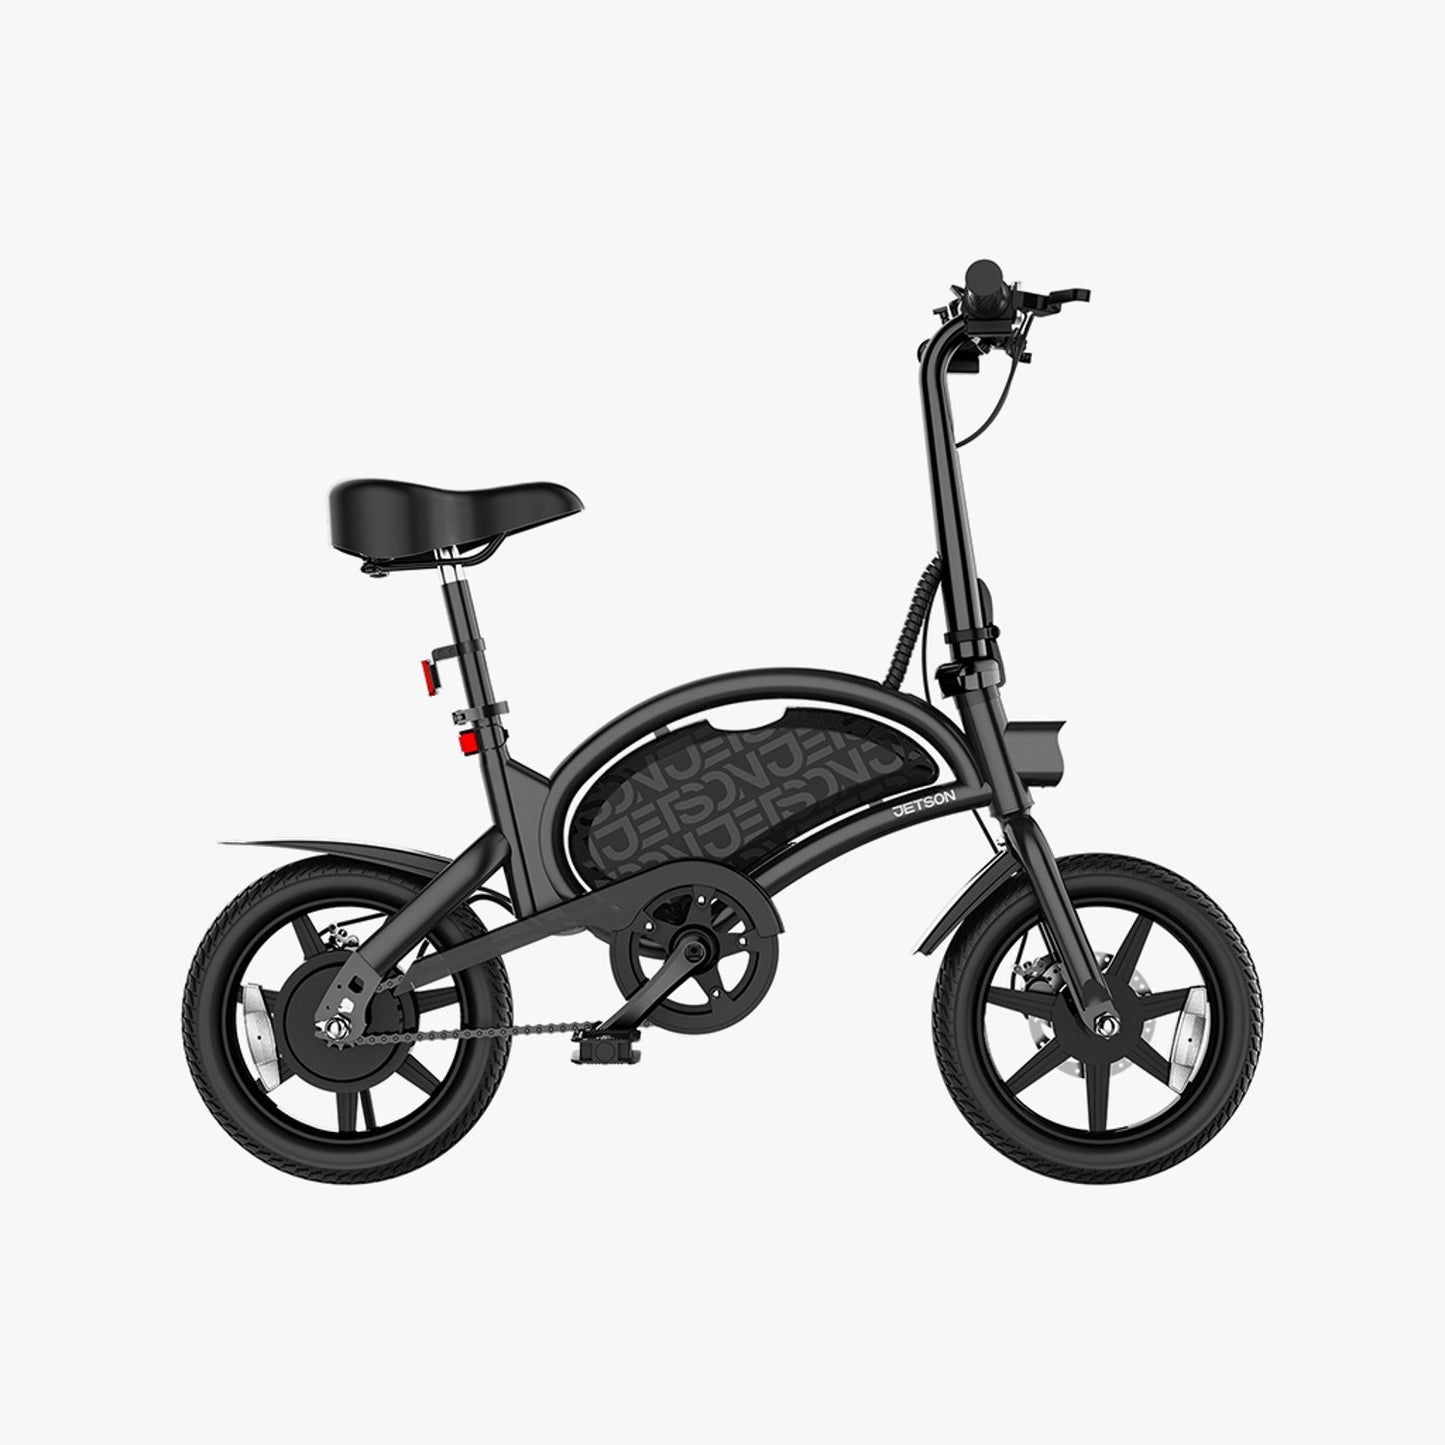 Jetson Bolt Pro Folding Electric Bike with LED display, headlight and rear light